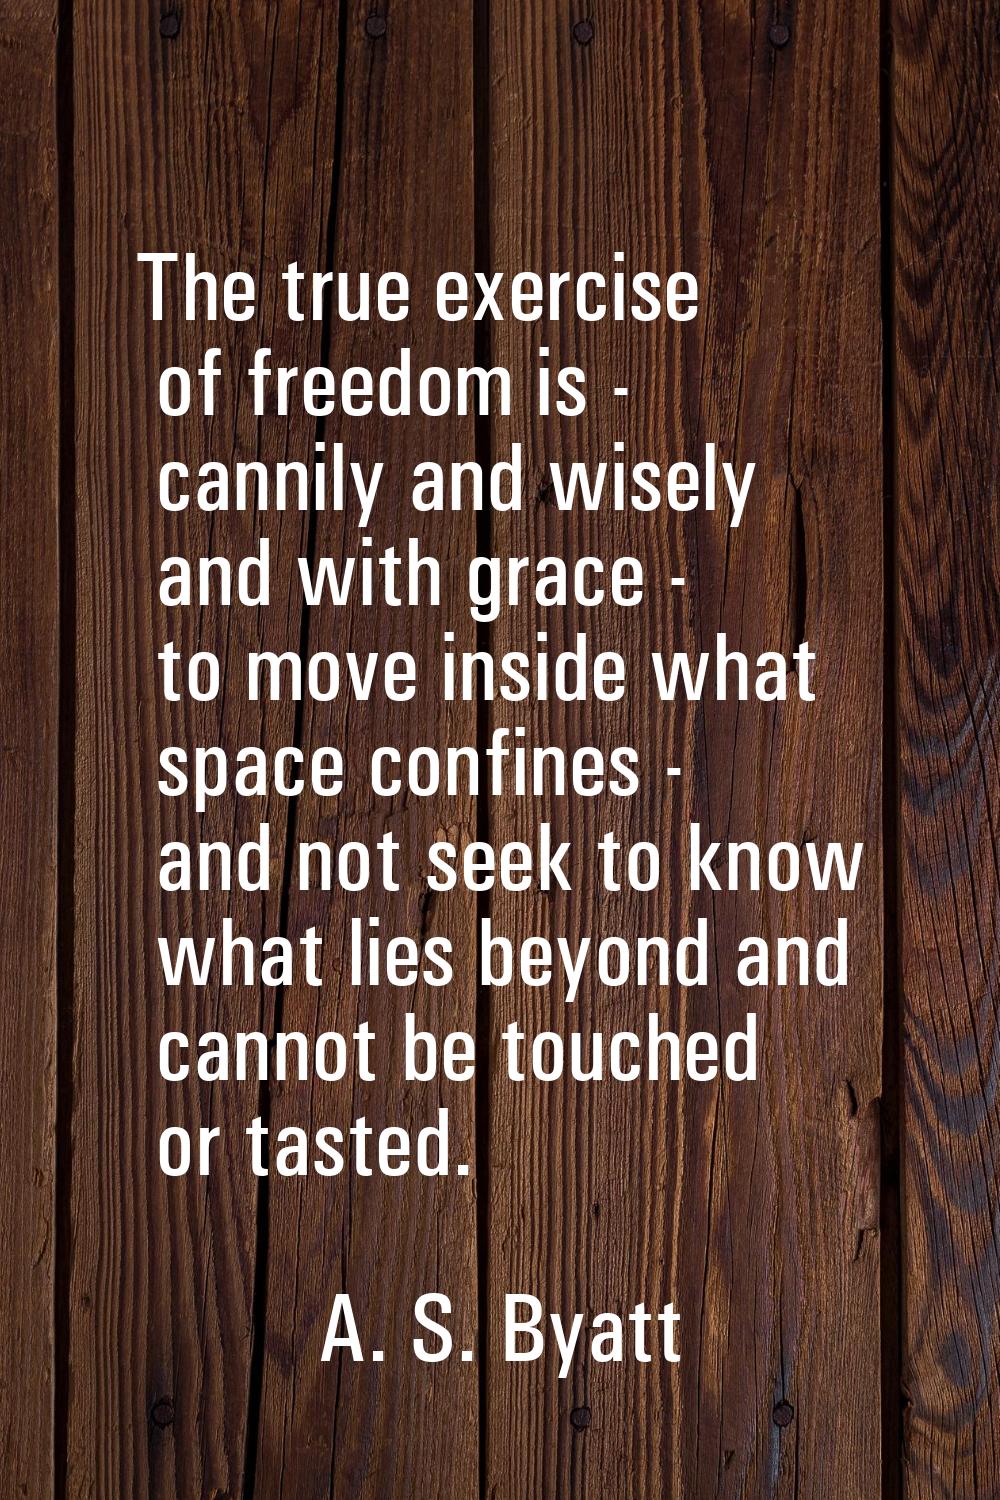 The true exercise of freedom is - cannily and wisely and with grace - to move inside what space con